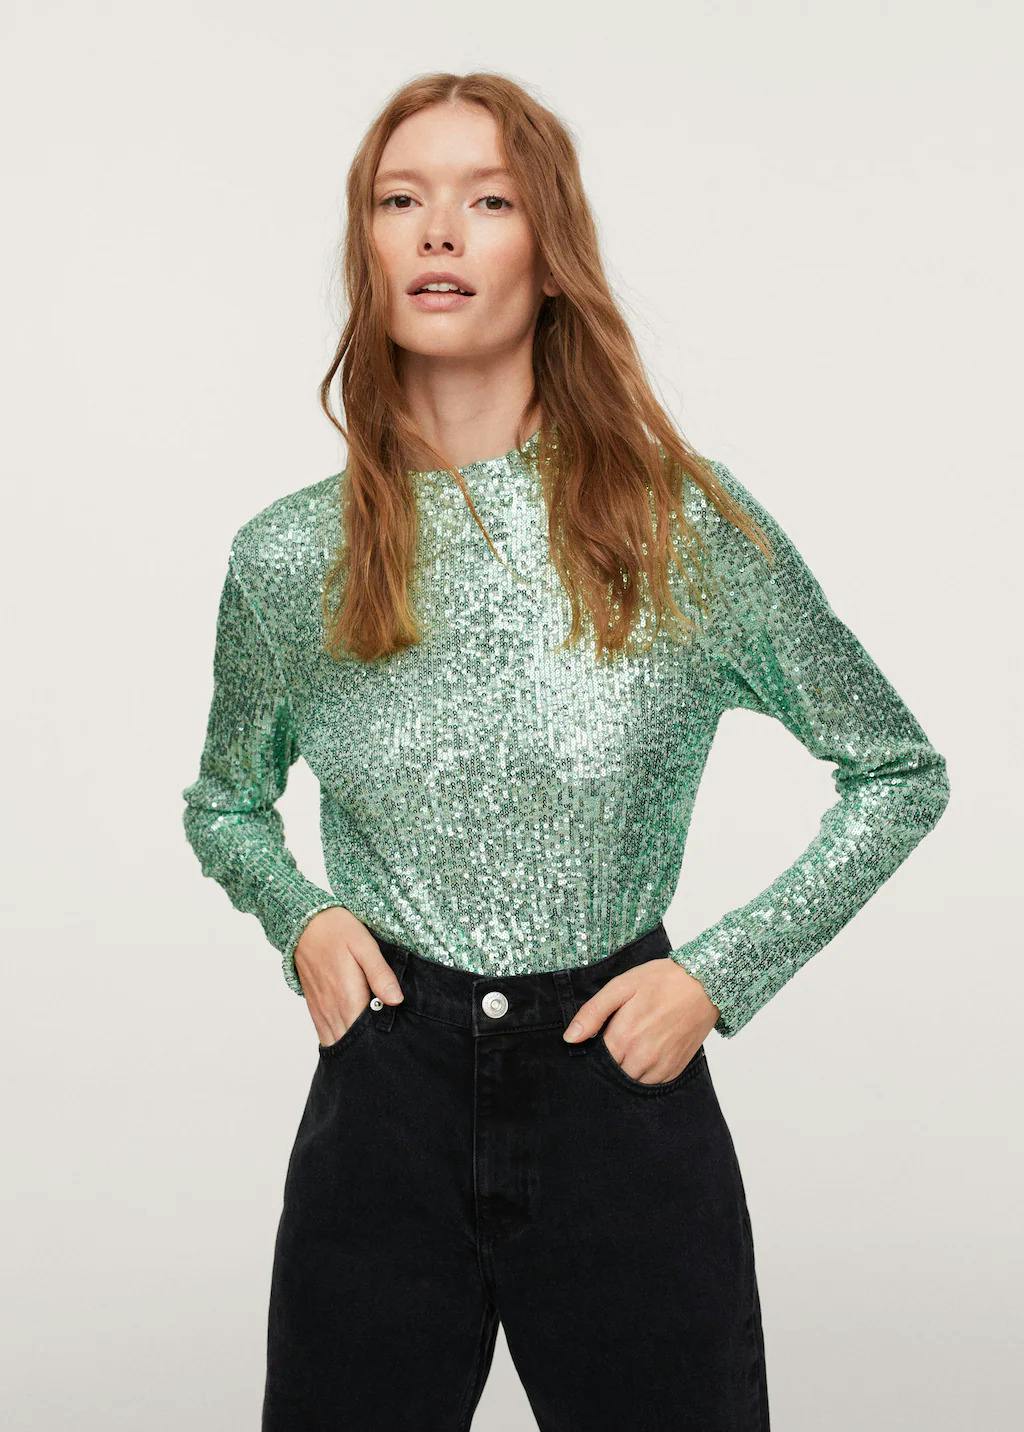 Where to buy sequin tops in December for Christmas 2021